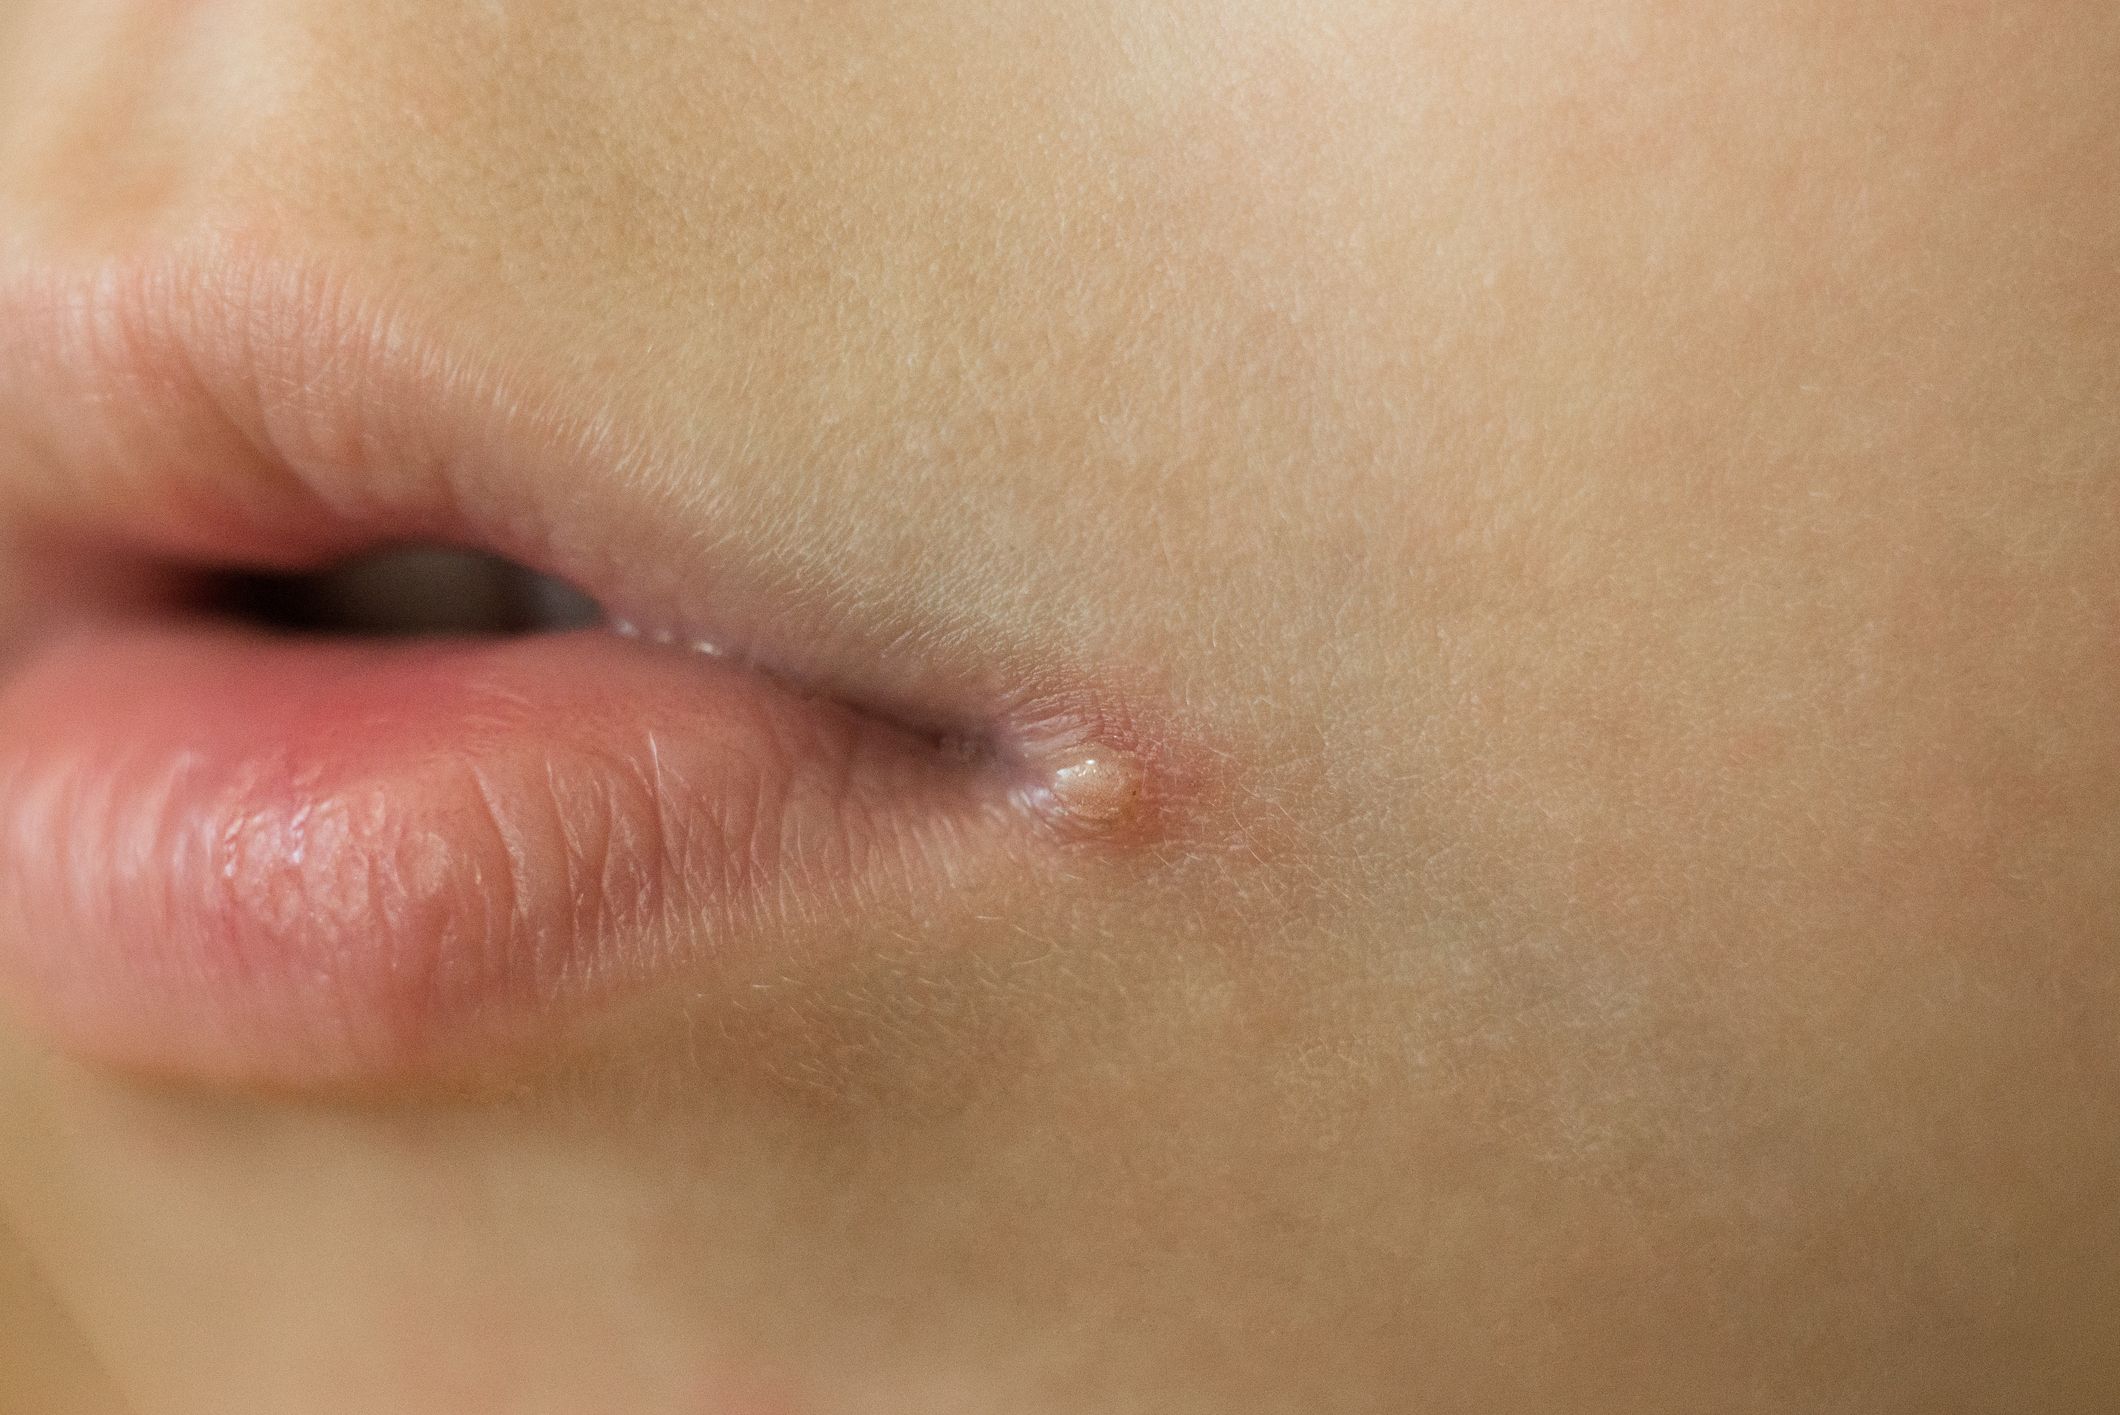 Lip clear bump on Causes of